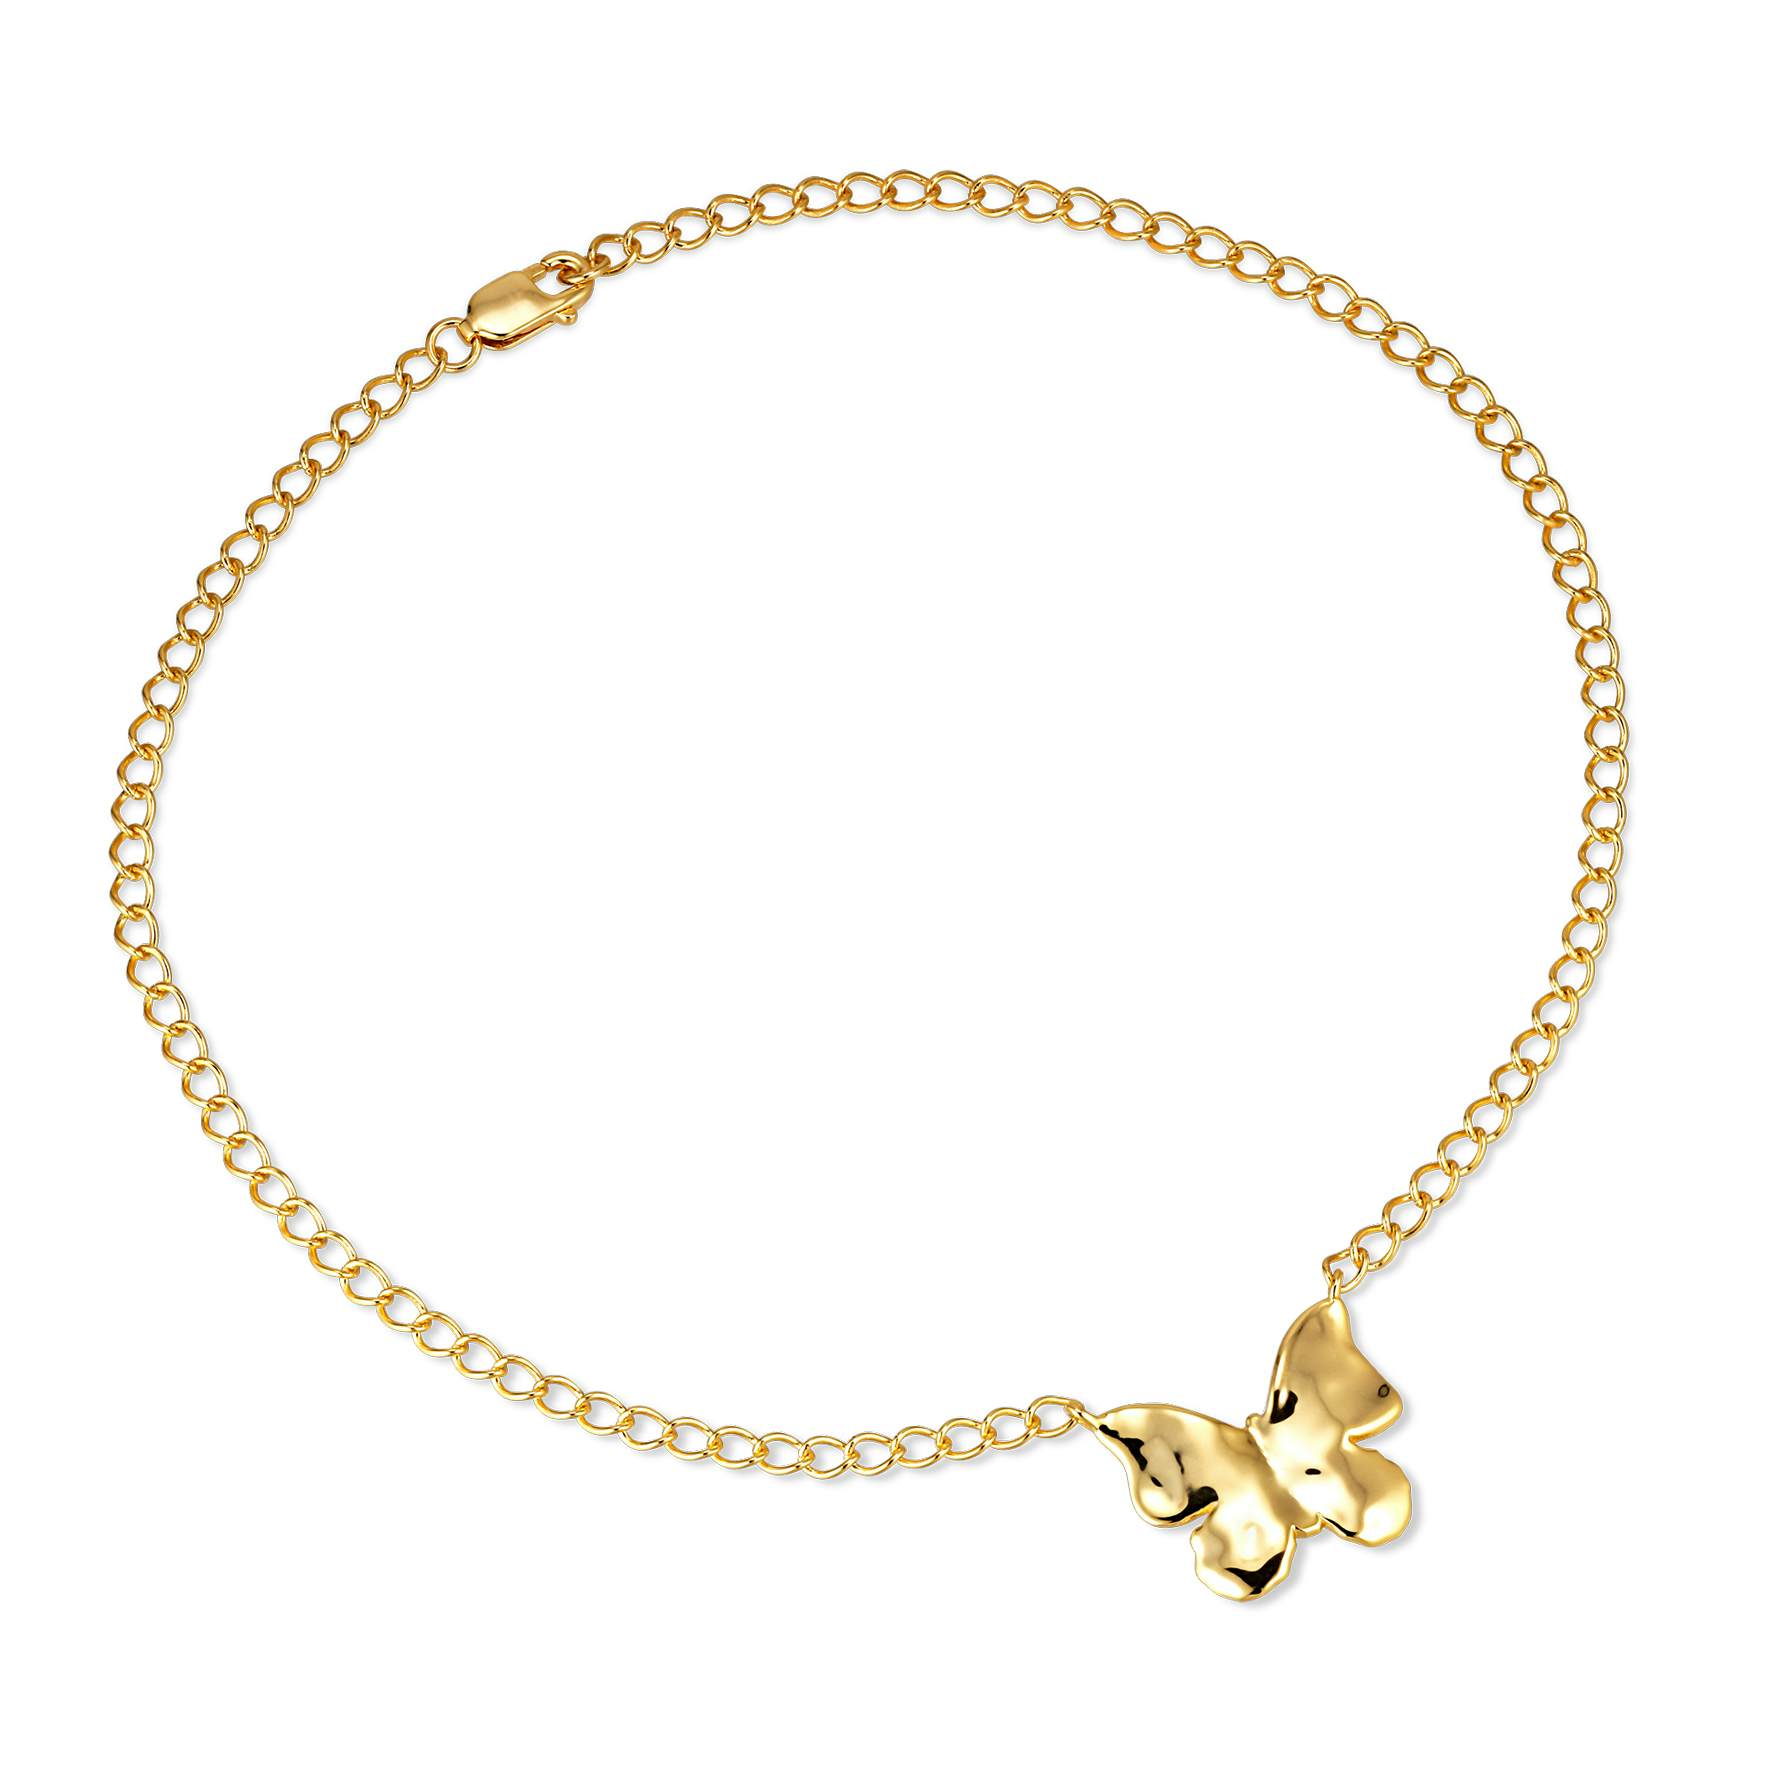 Butterfly Anklet Chain from Jane Kønig in Goldplated-Silver Sterling 925